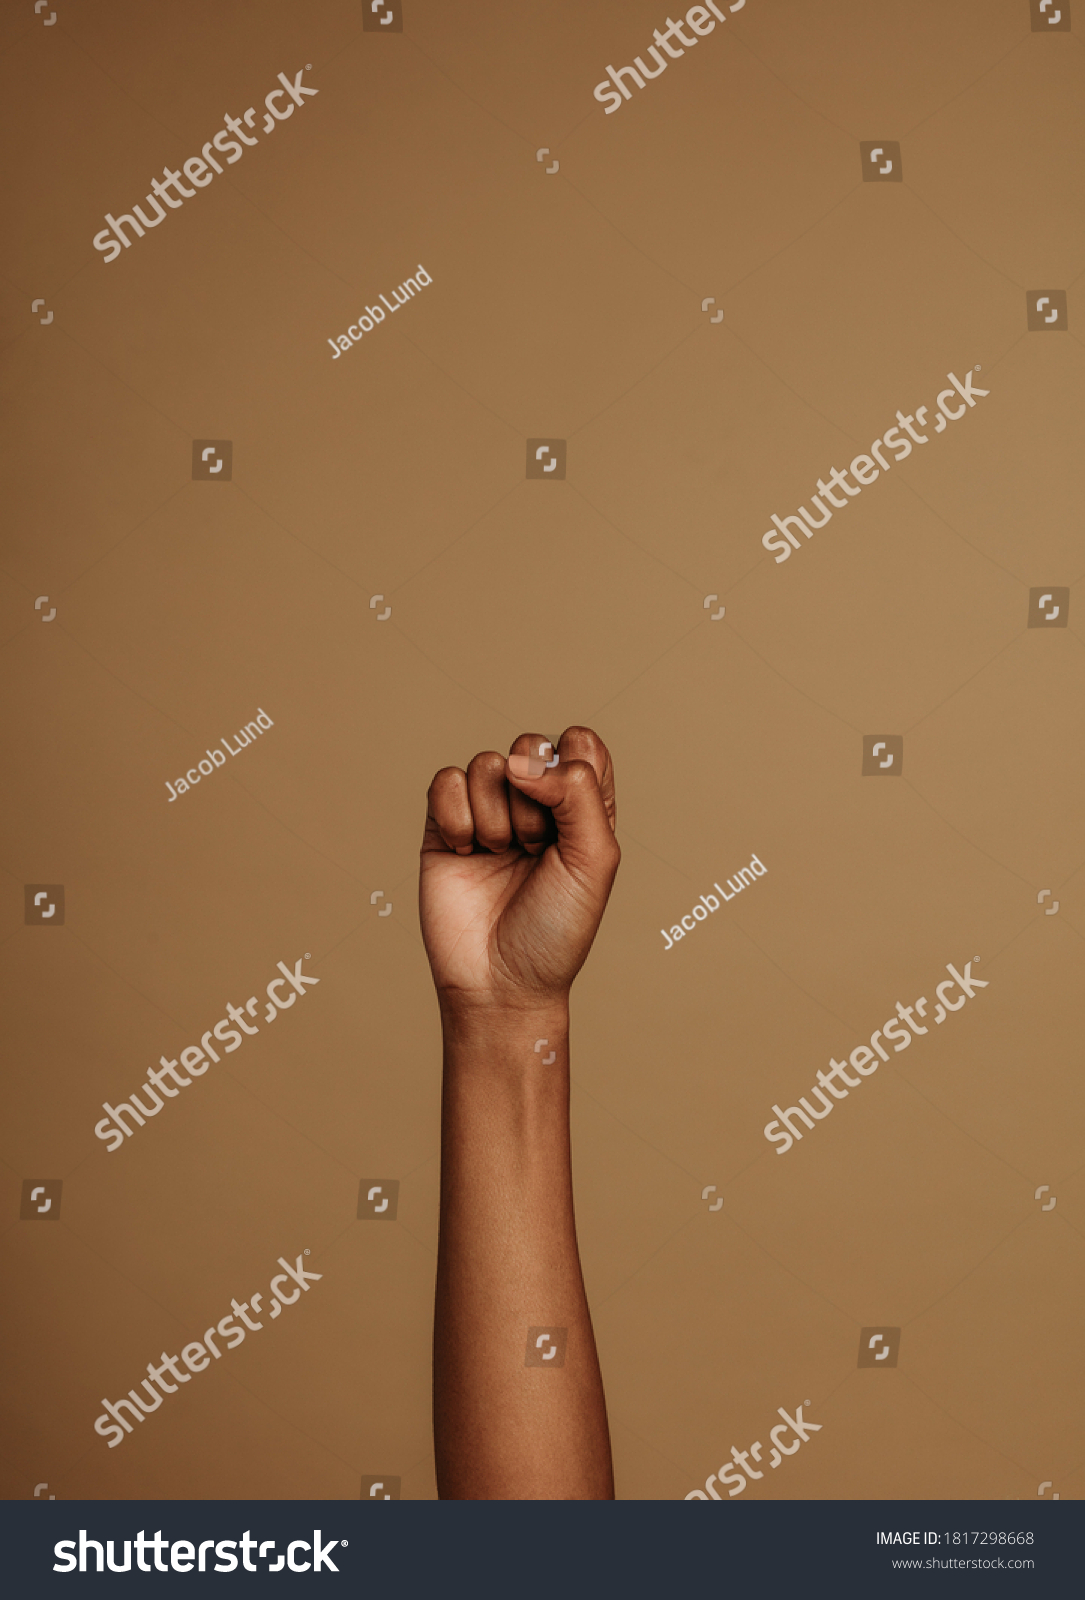 Closed fist sign associated with black lives matter movement. Cropped shot of fist raised up . #1817298668